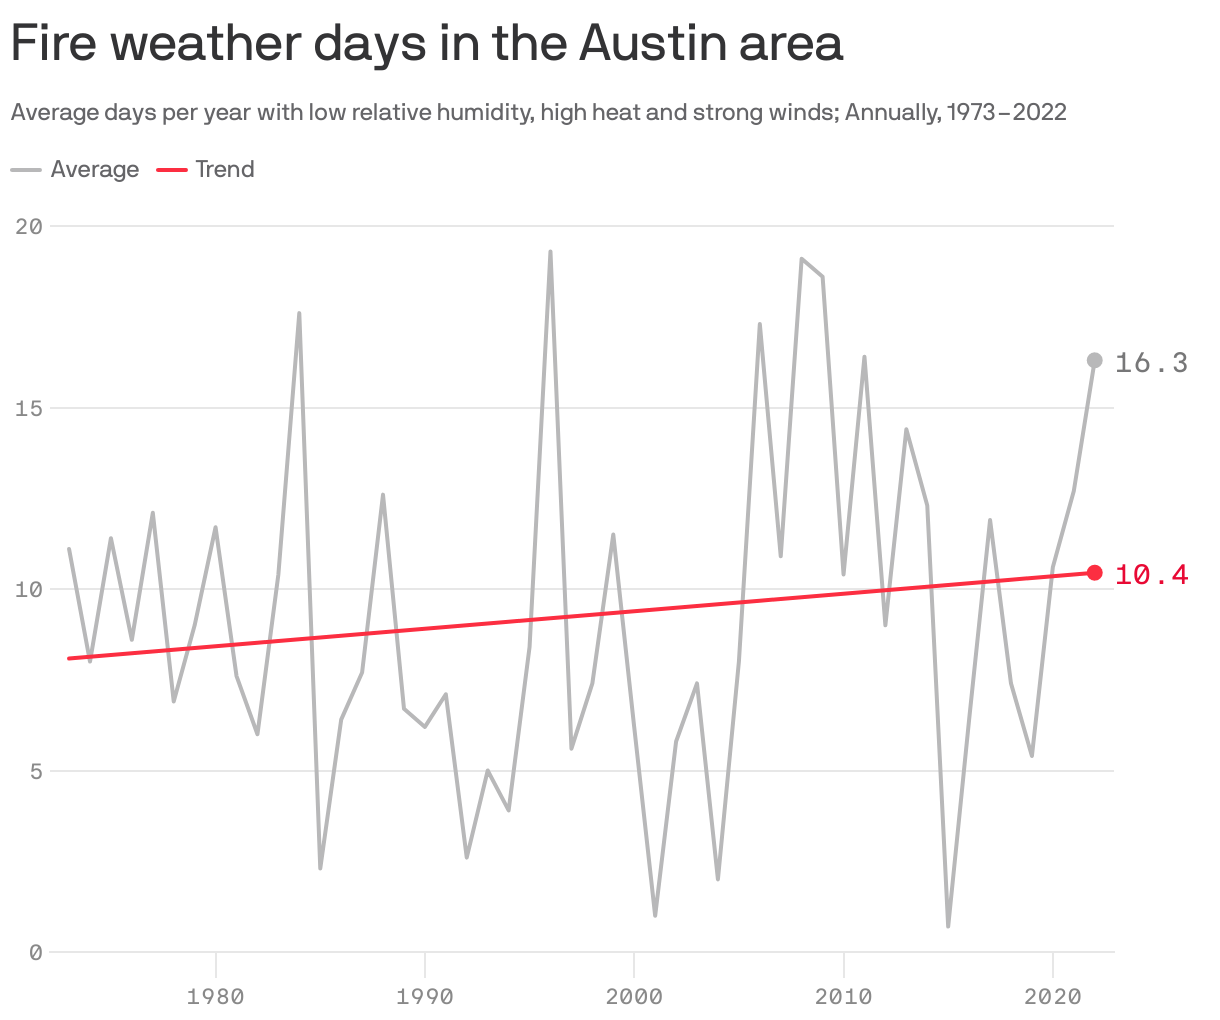 Fire weather days in the Austin area